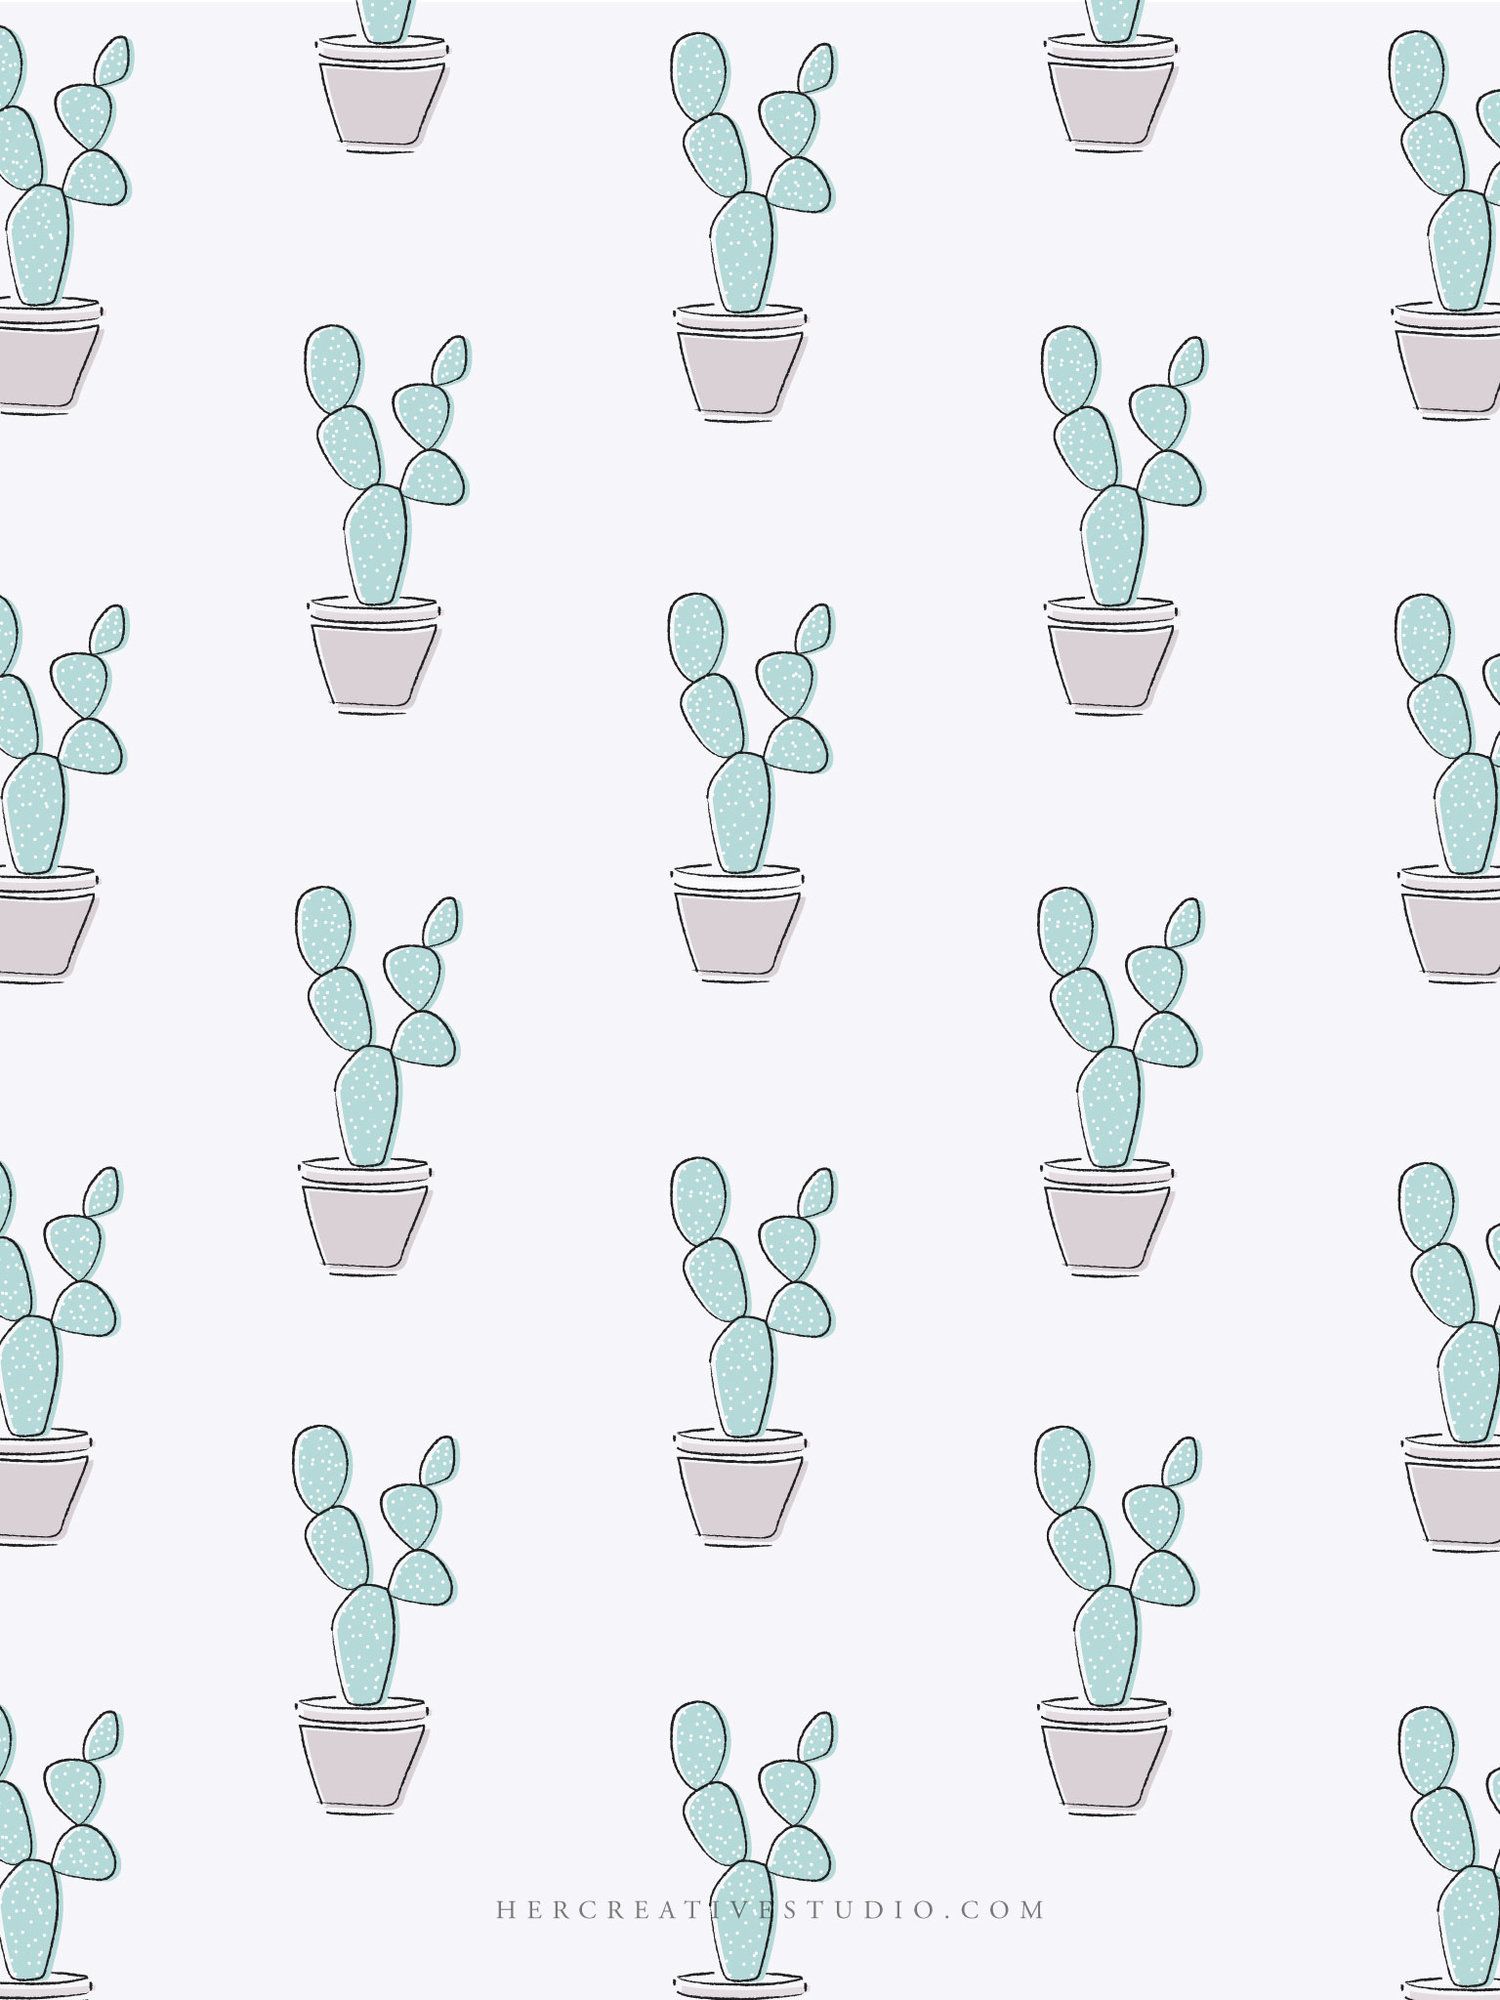 Cactus pattern on a white background - Cactus, April